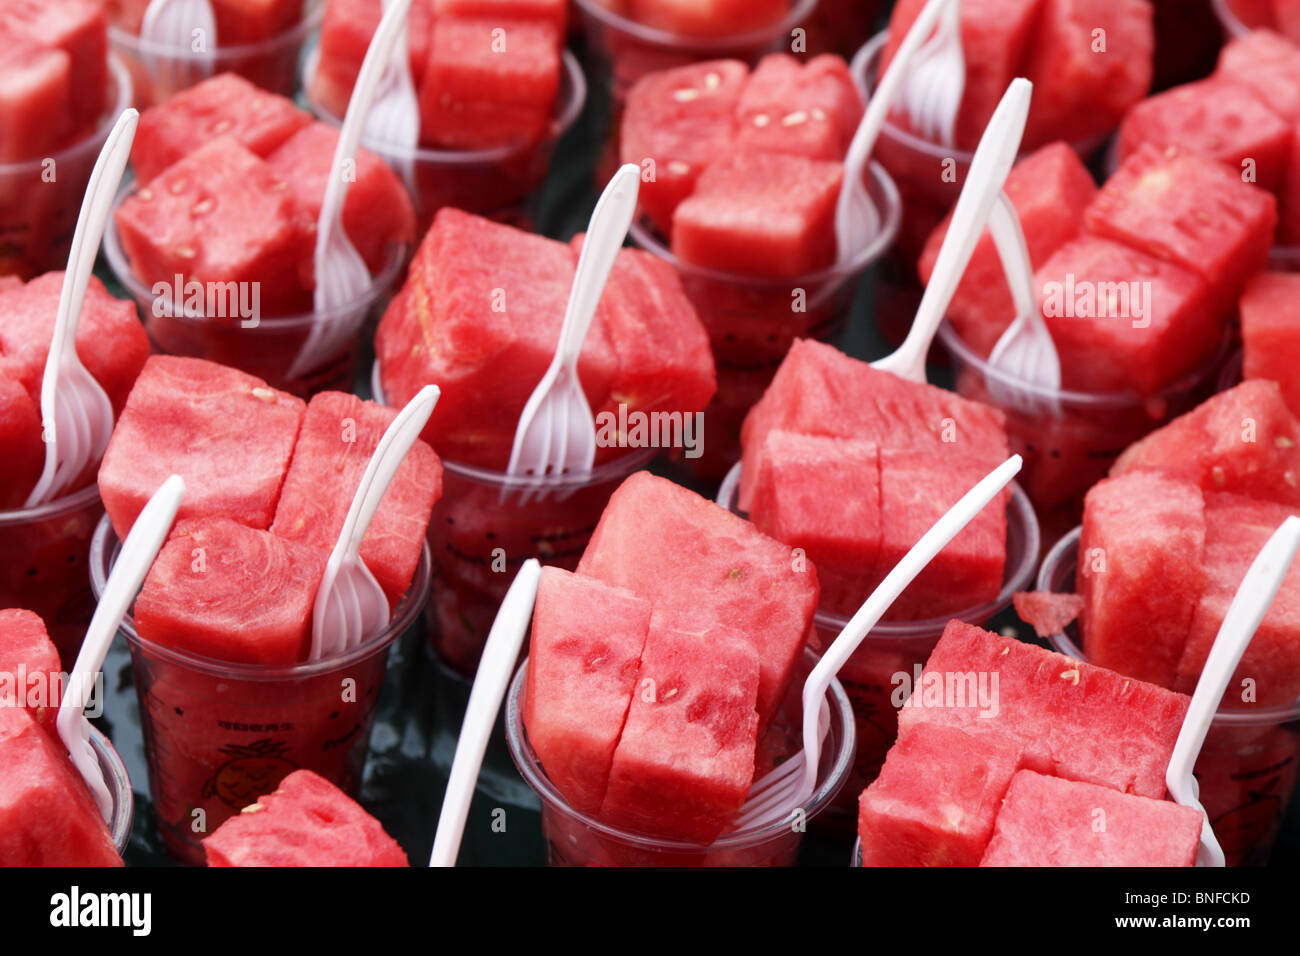 Watermelon portions ready to eat Stock Photo